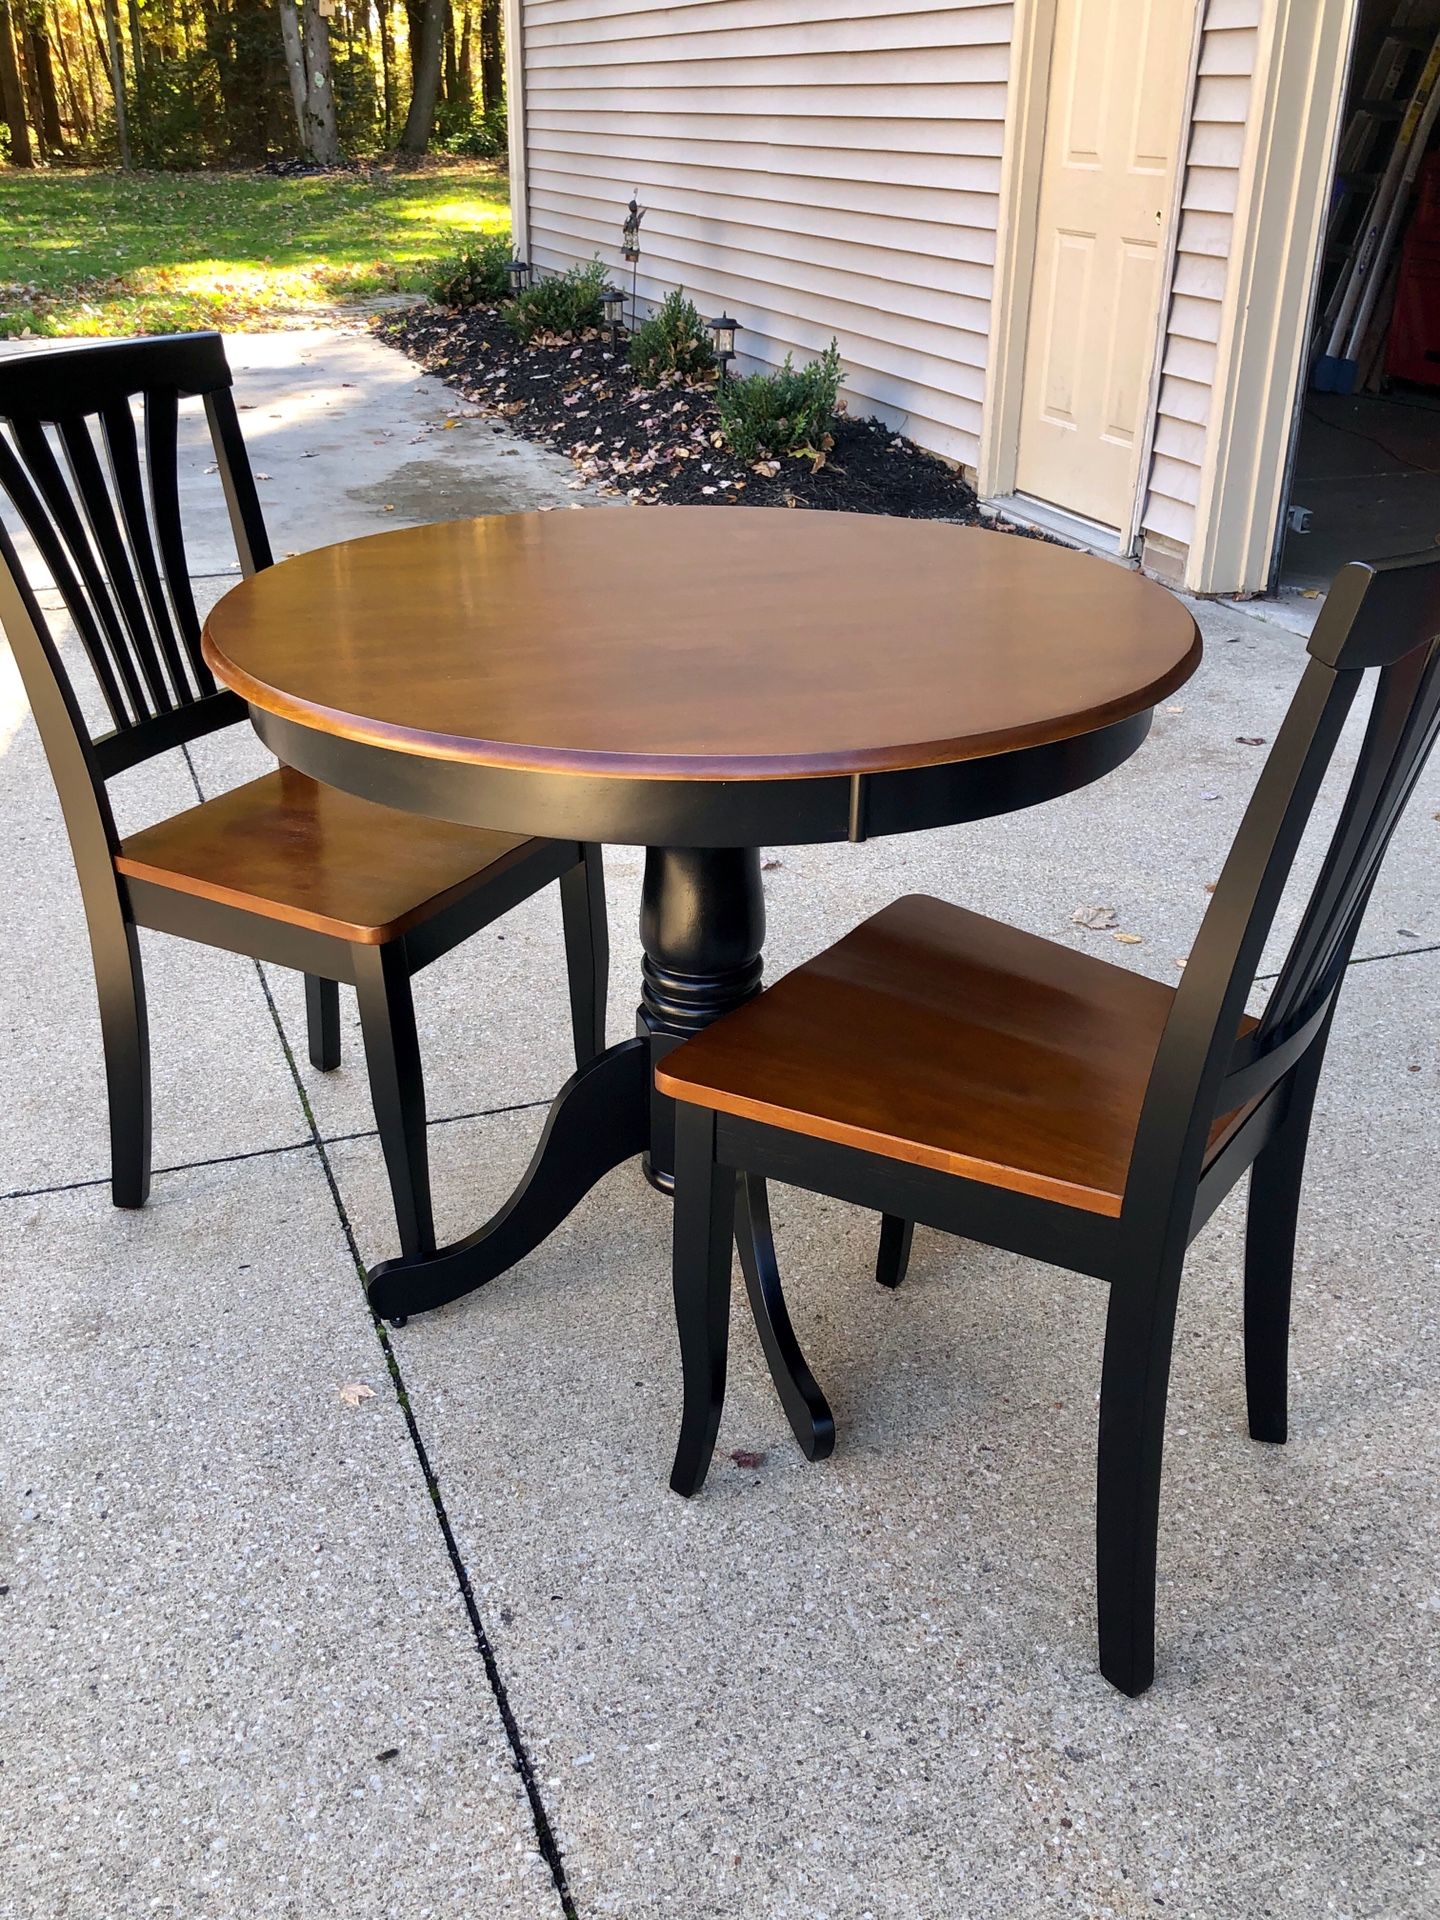 Brand new 36” round kitchen table/2 chairs